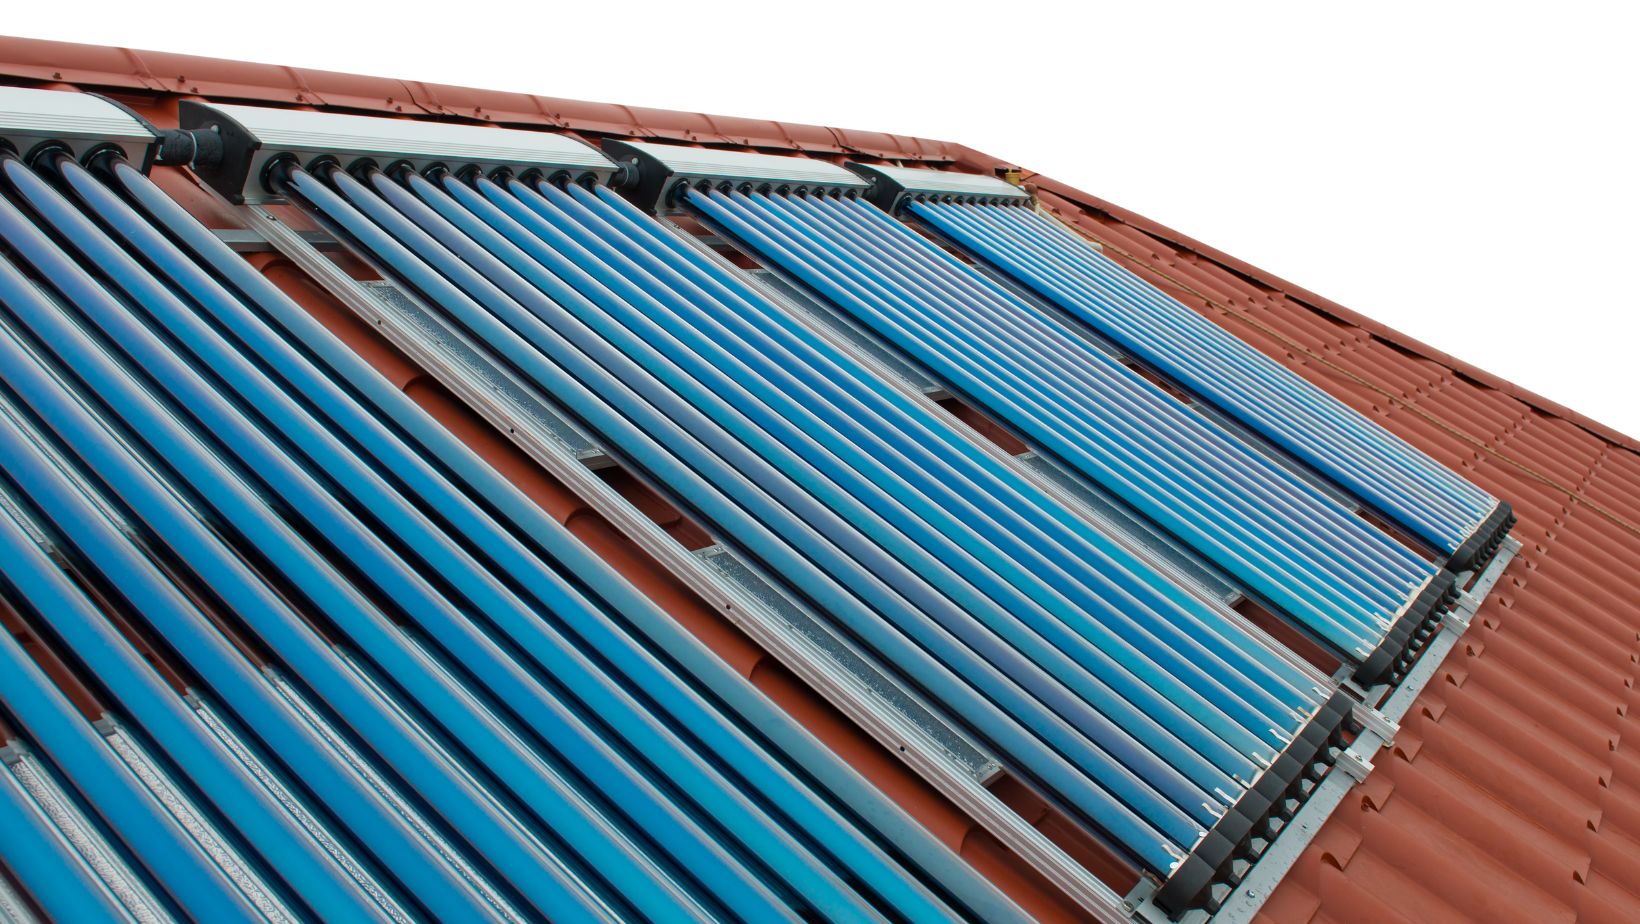 Solar tubes on a roof for heating